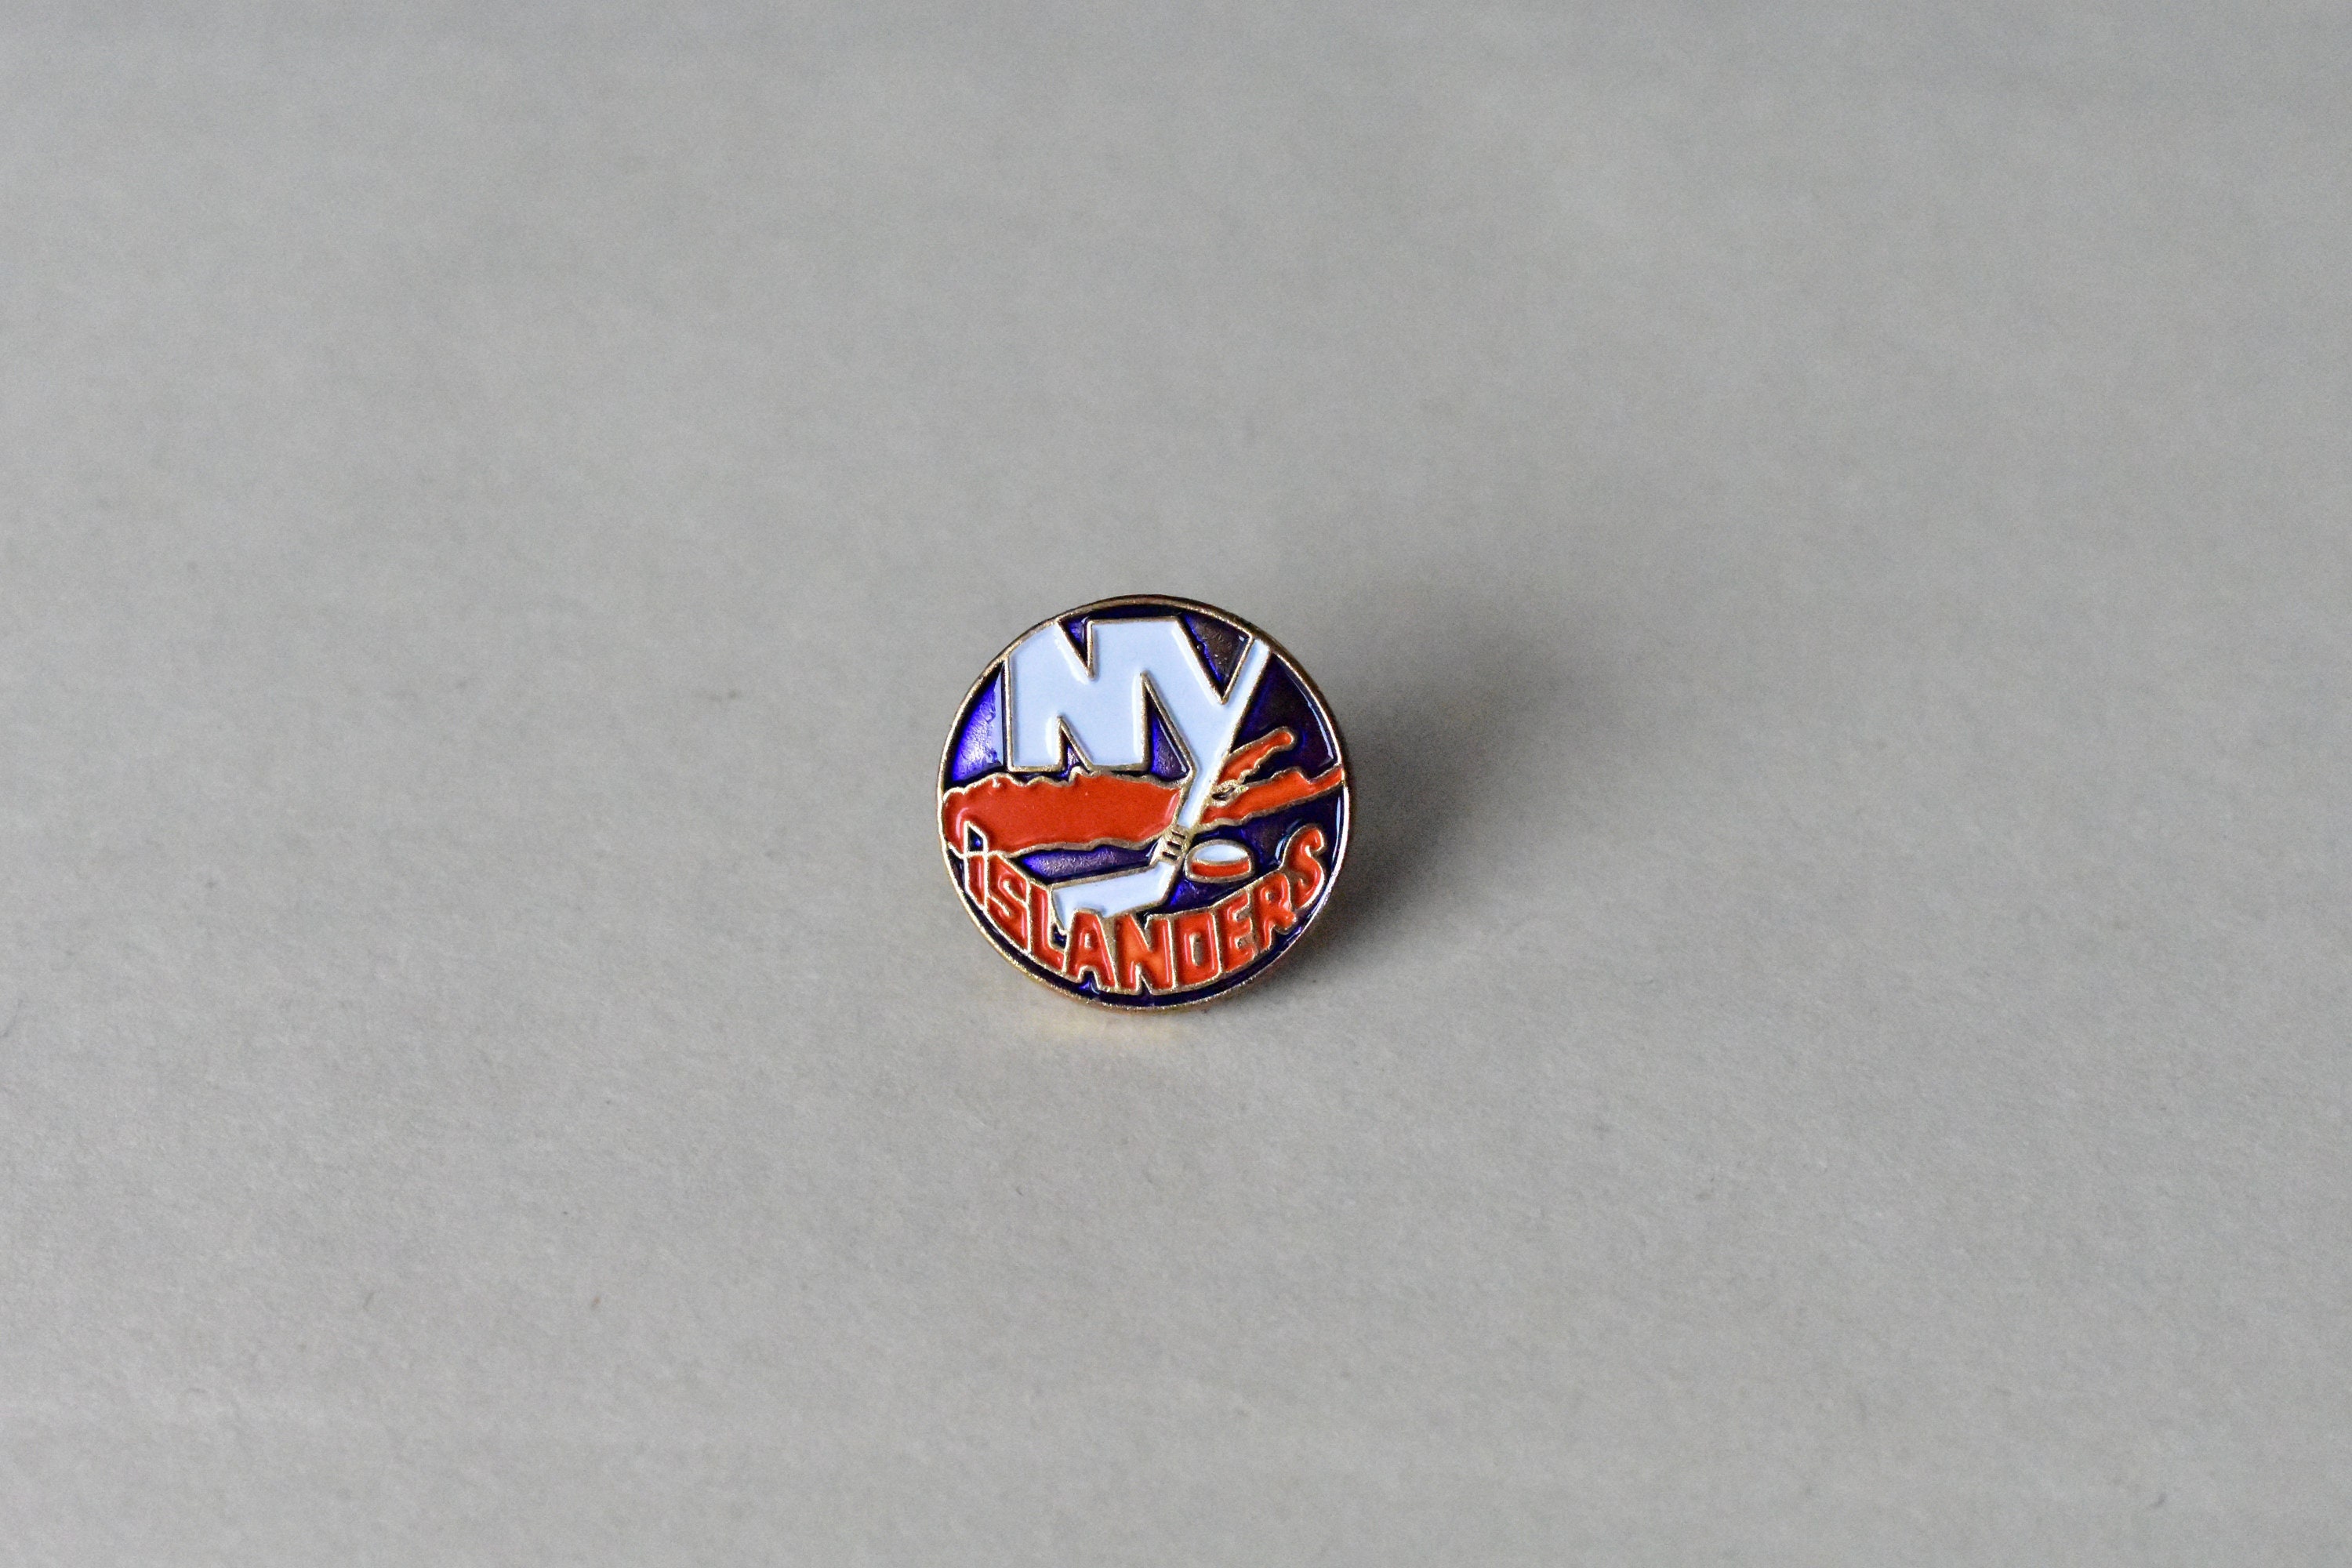 New York Rangers Special Edition Lapel Pin - New York Teams Store